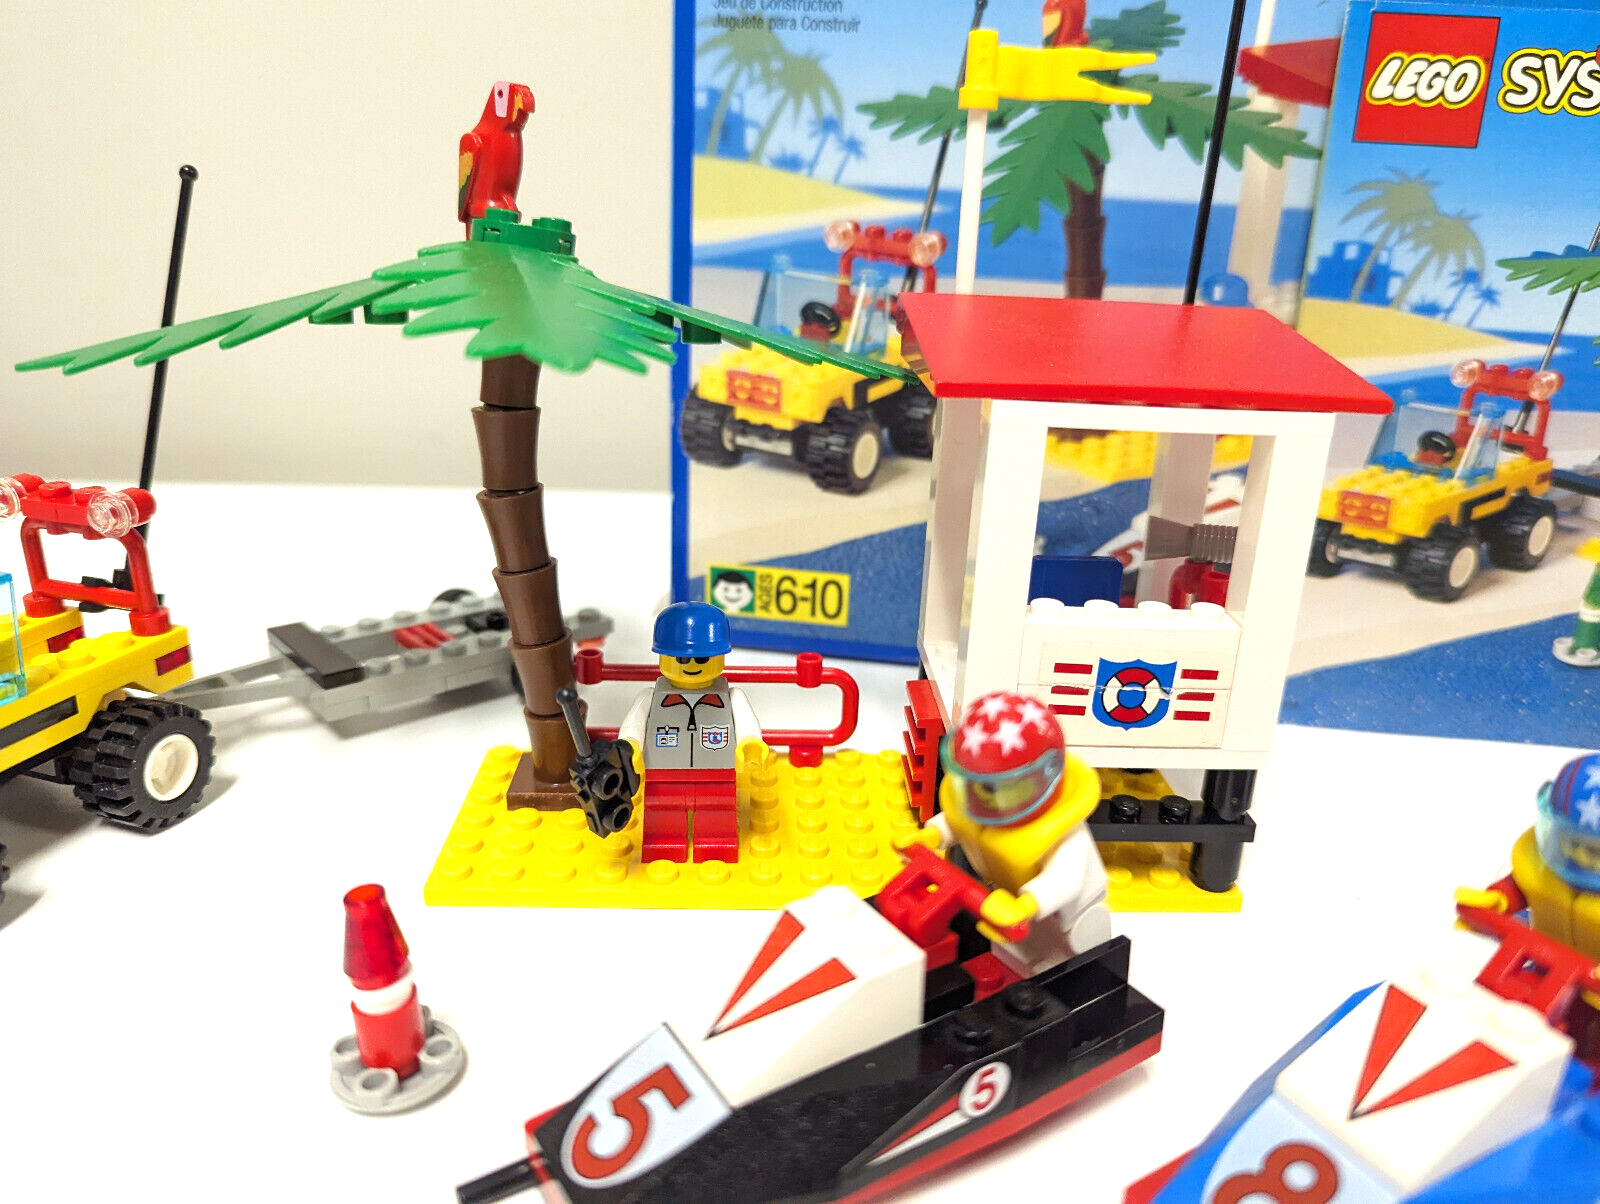 LEGO 6334 Classic Town: Wave Runner Race w/ Instructions, Box - 100% Complete